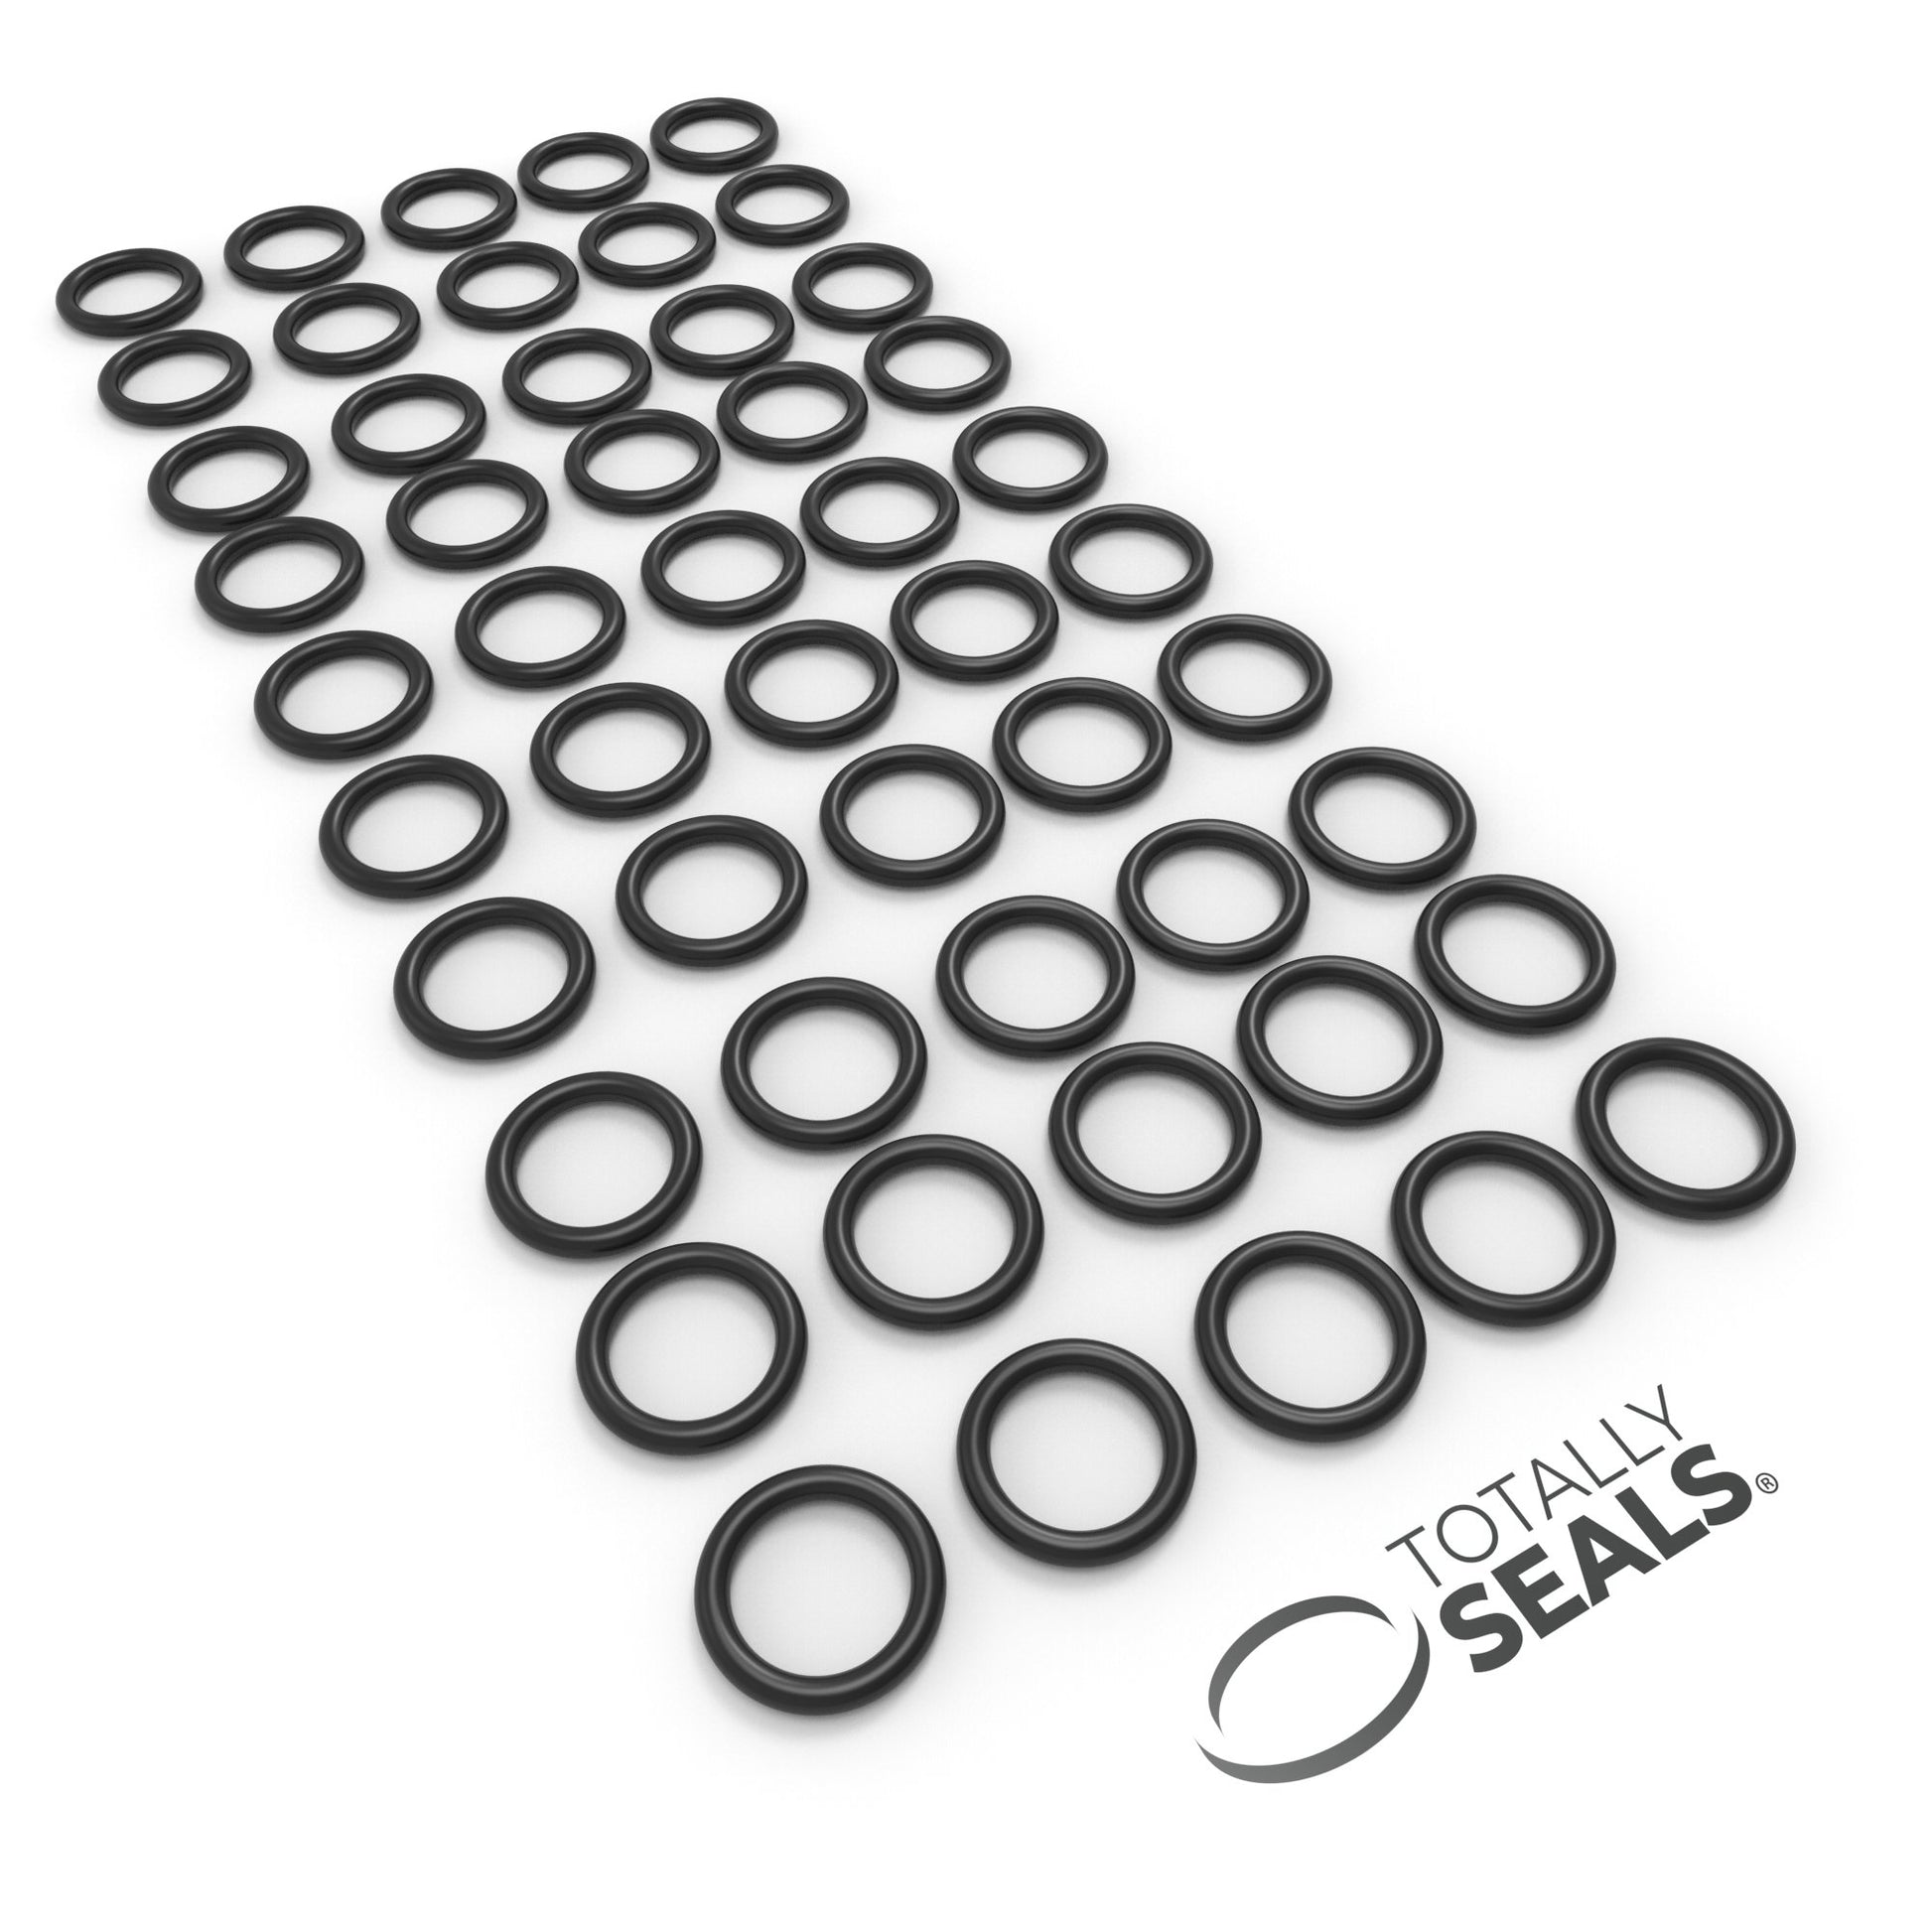 25mm x 3.5mm (32mm OD) Nitrile O-Rings - Totally Seals®